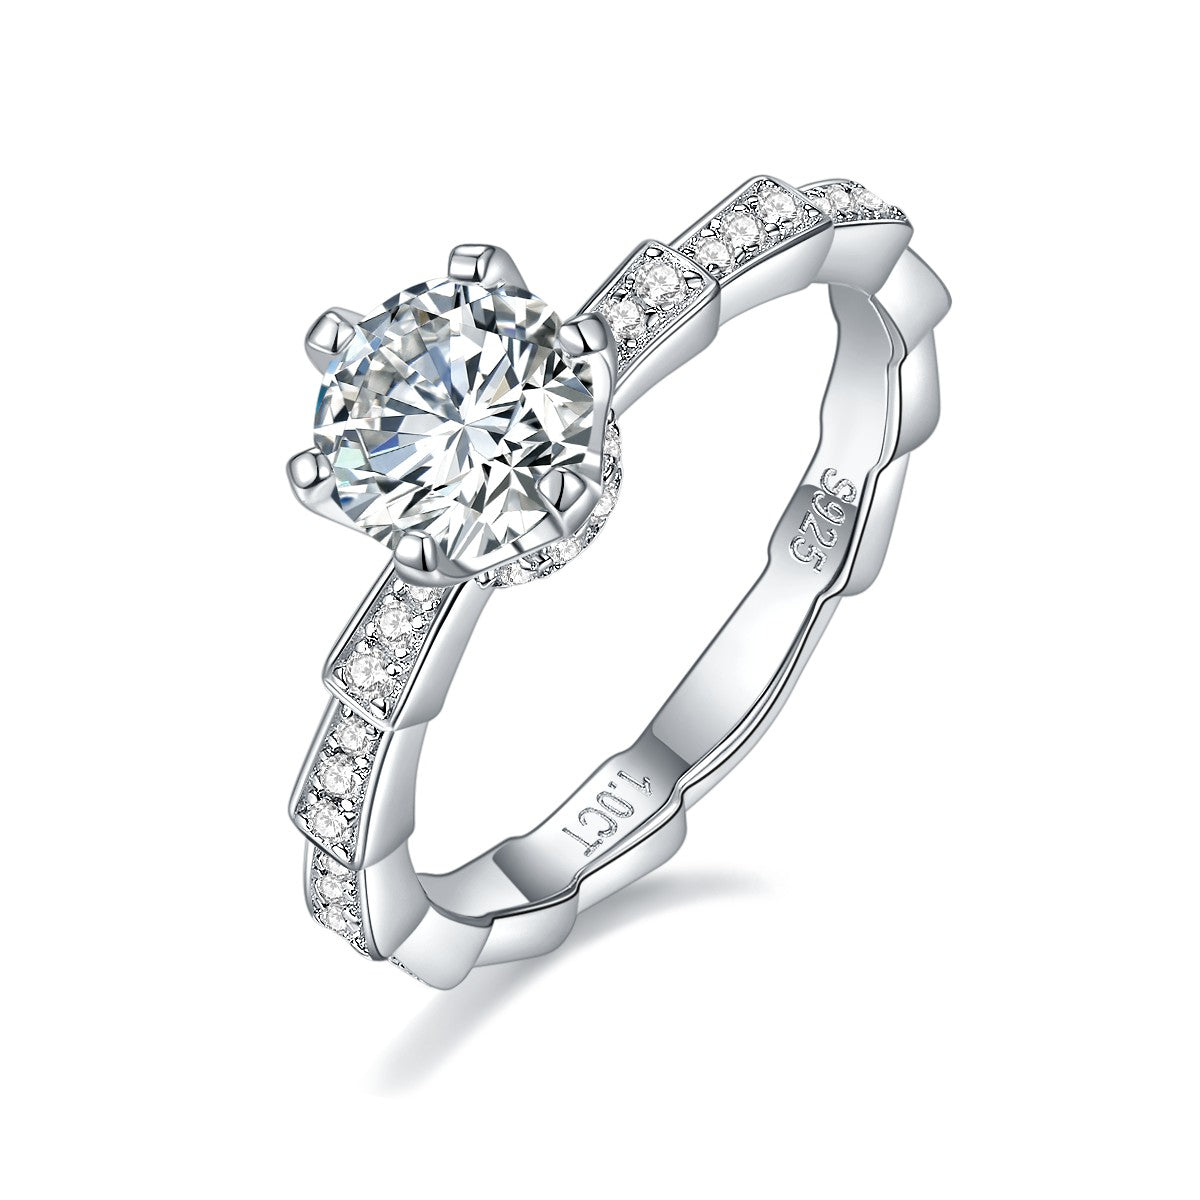 【02LIVE # link 52- BUY 1 GET 1 free ring】RM1033 Snake Bone Silver Moissanite Diamond Clad Ring with Zircon Edge